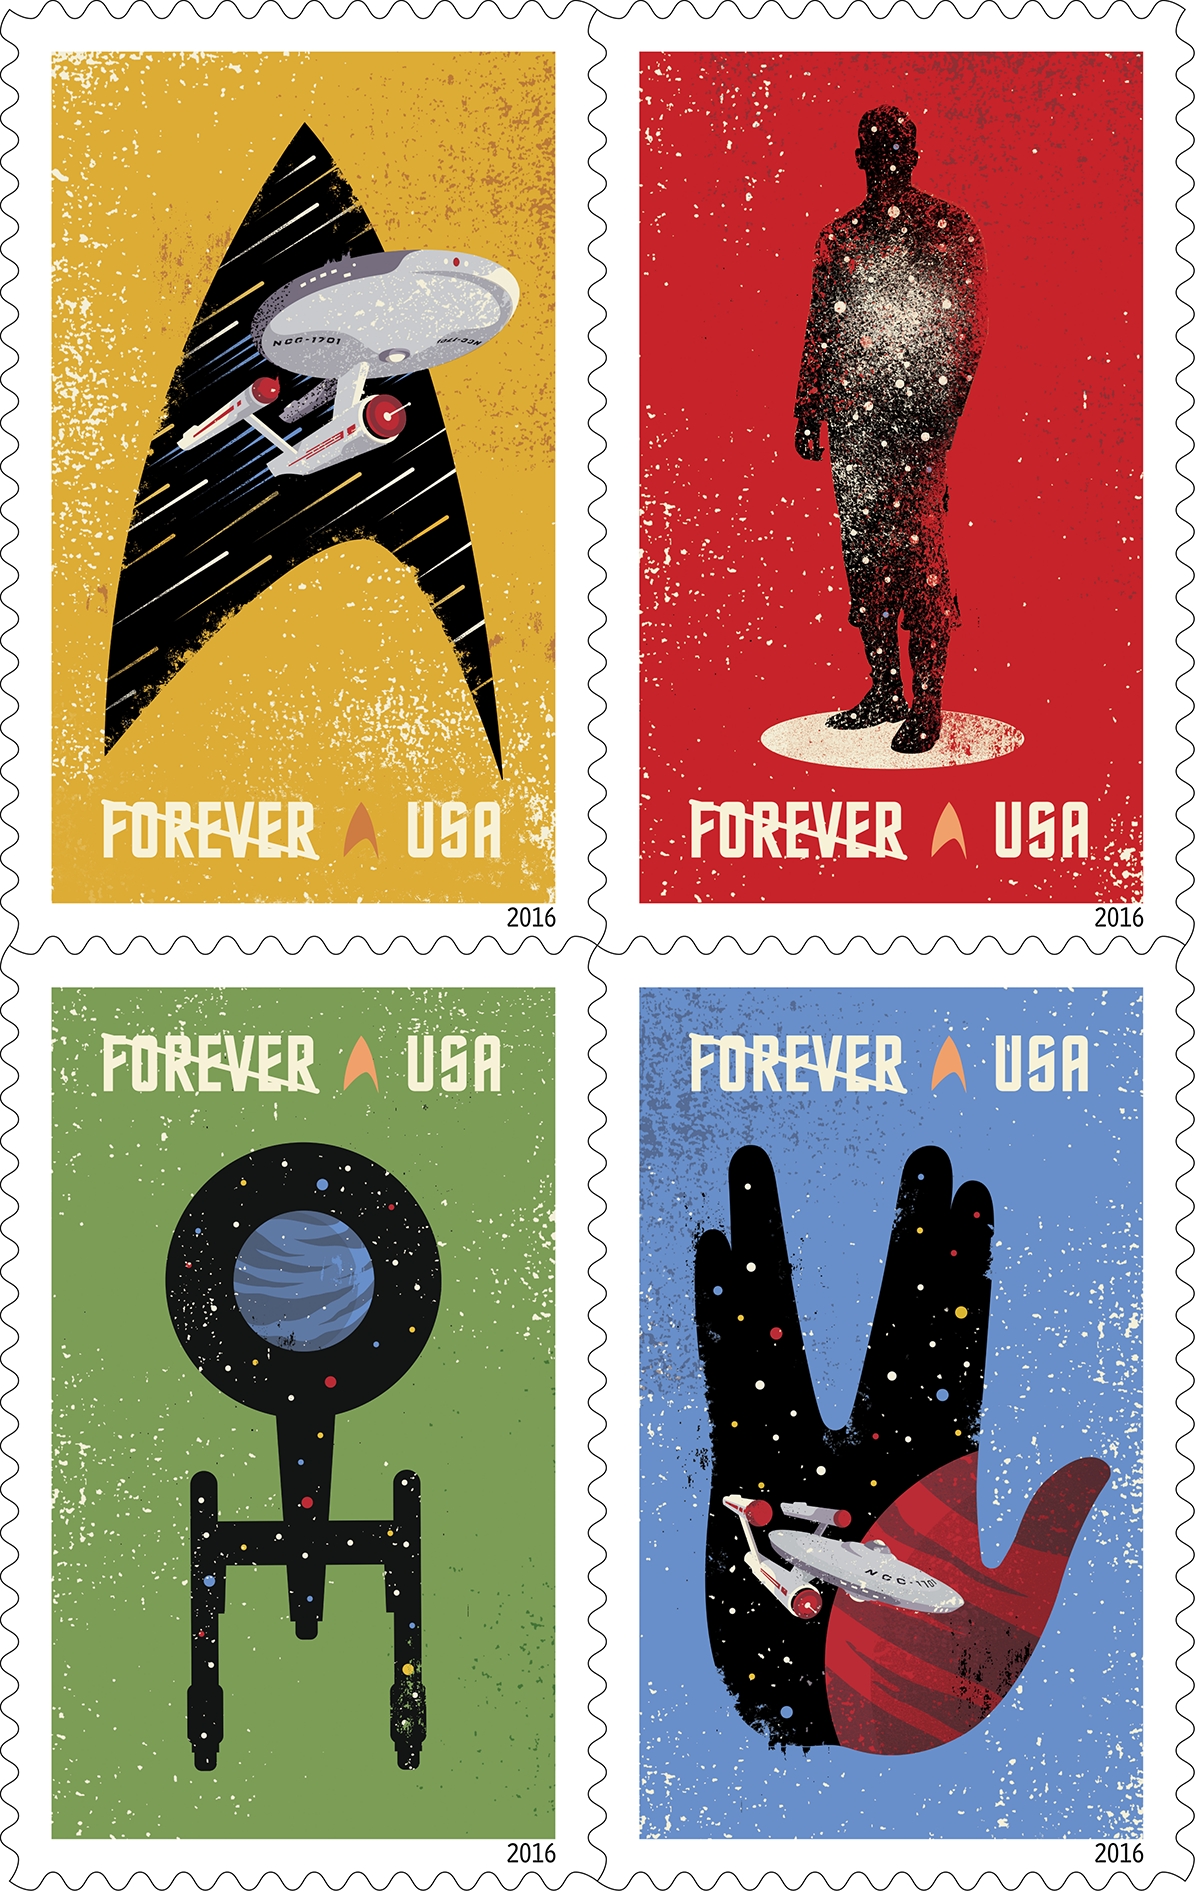 Star Trek™ Stamps to be Dedicated Sept. 2